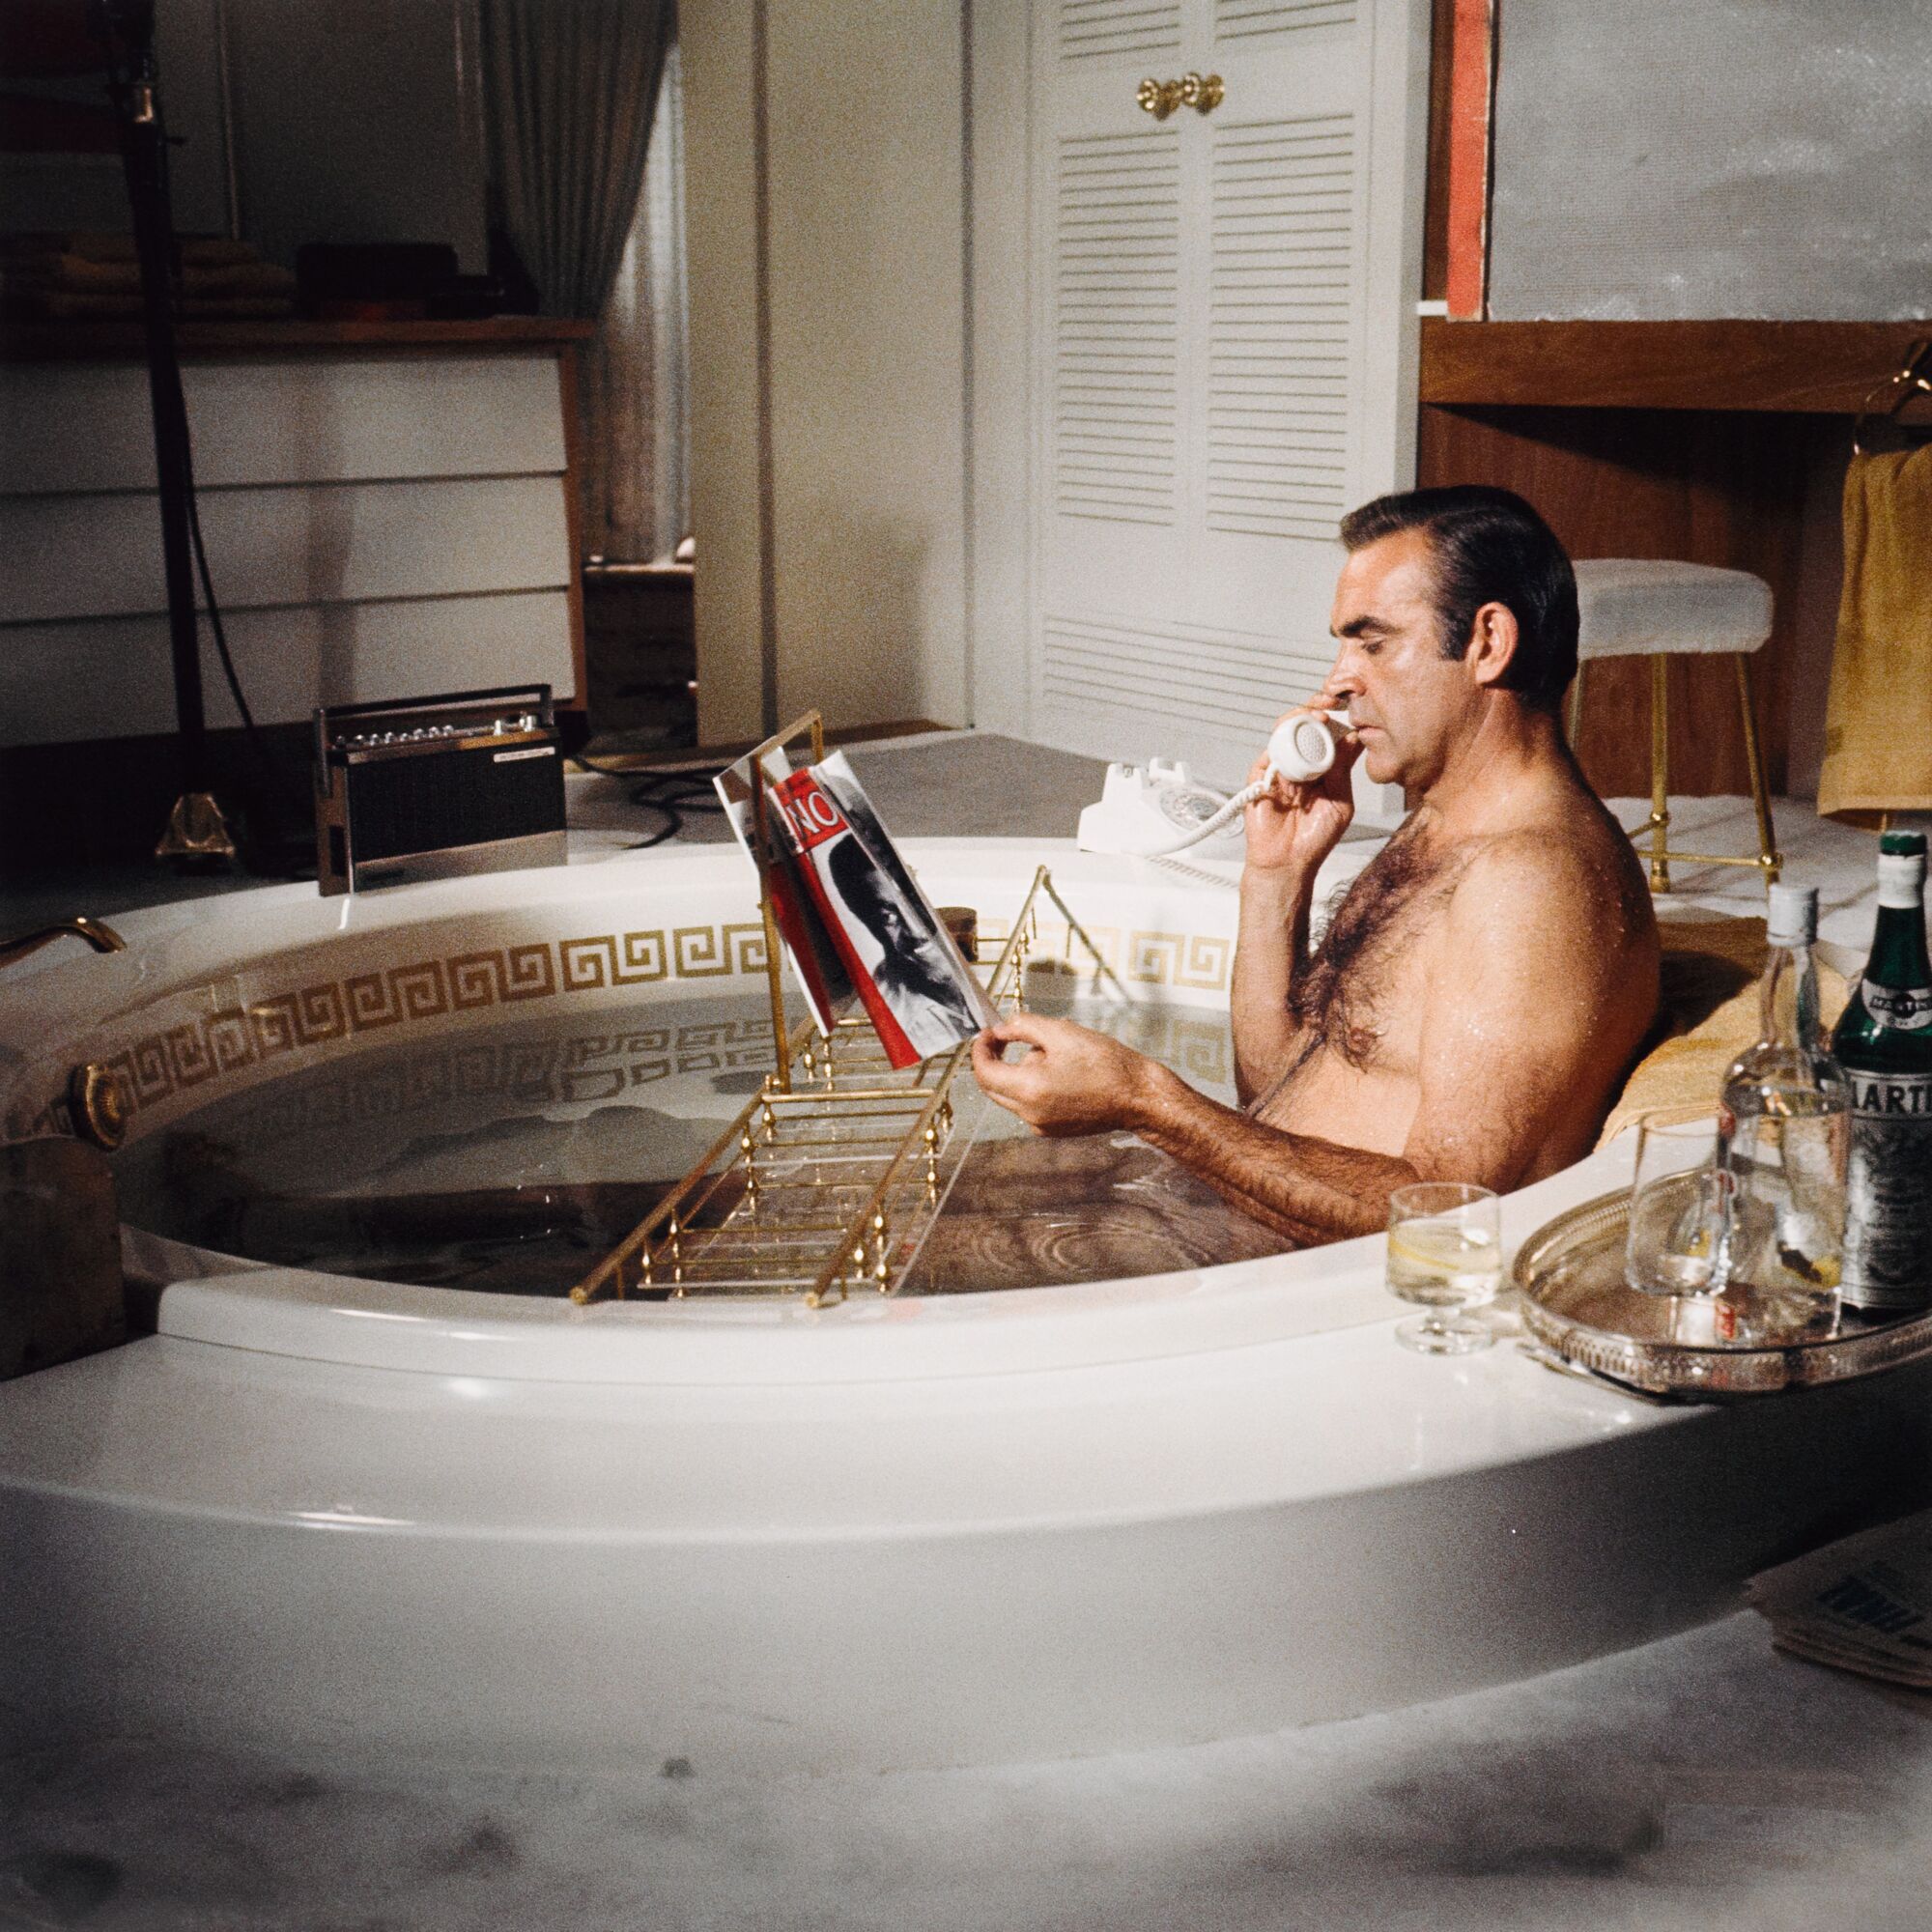 The Wick - Terry O’Neill, Sean Connery as James Bond in the Bath (On the Set of ‘Diamonds are Forever’), 1971 (£5000 – £7000)